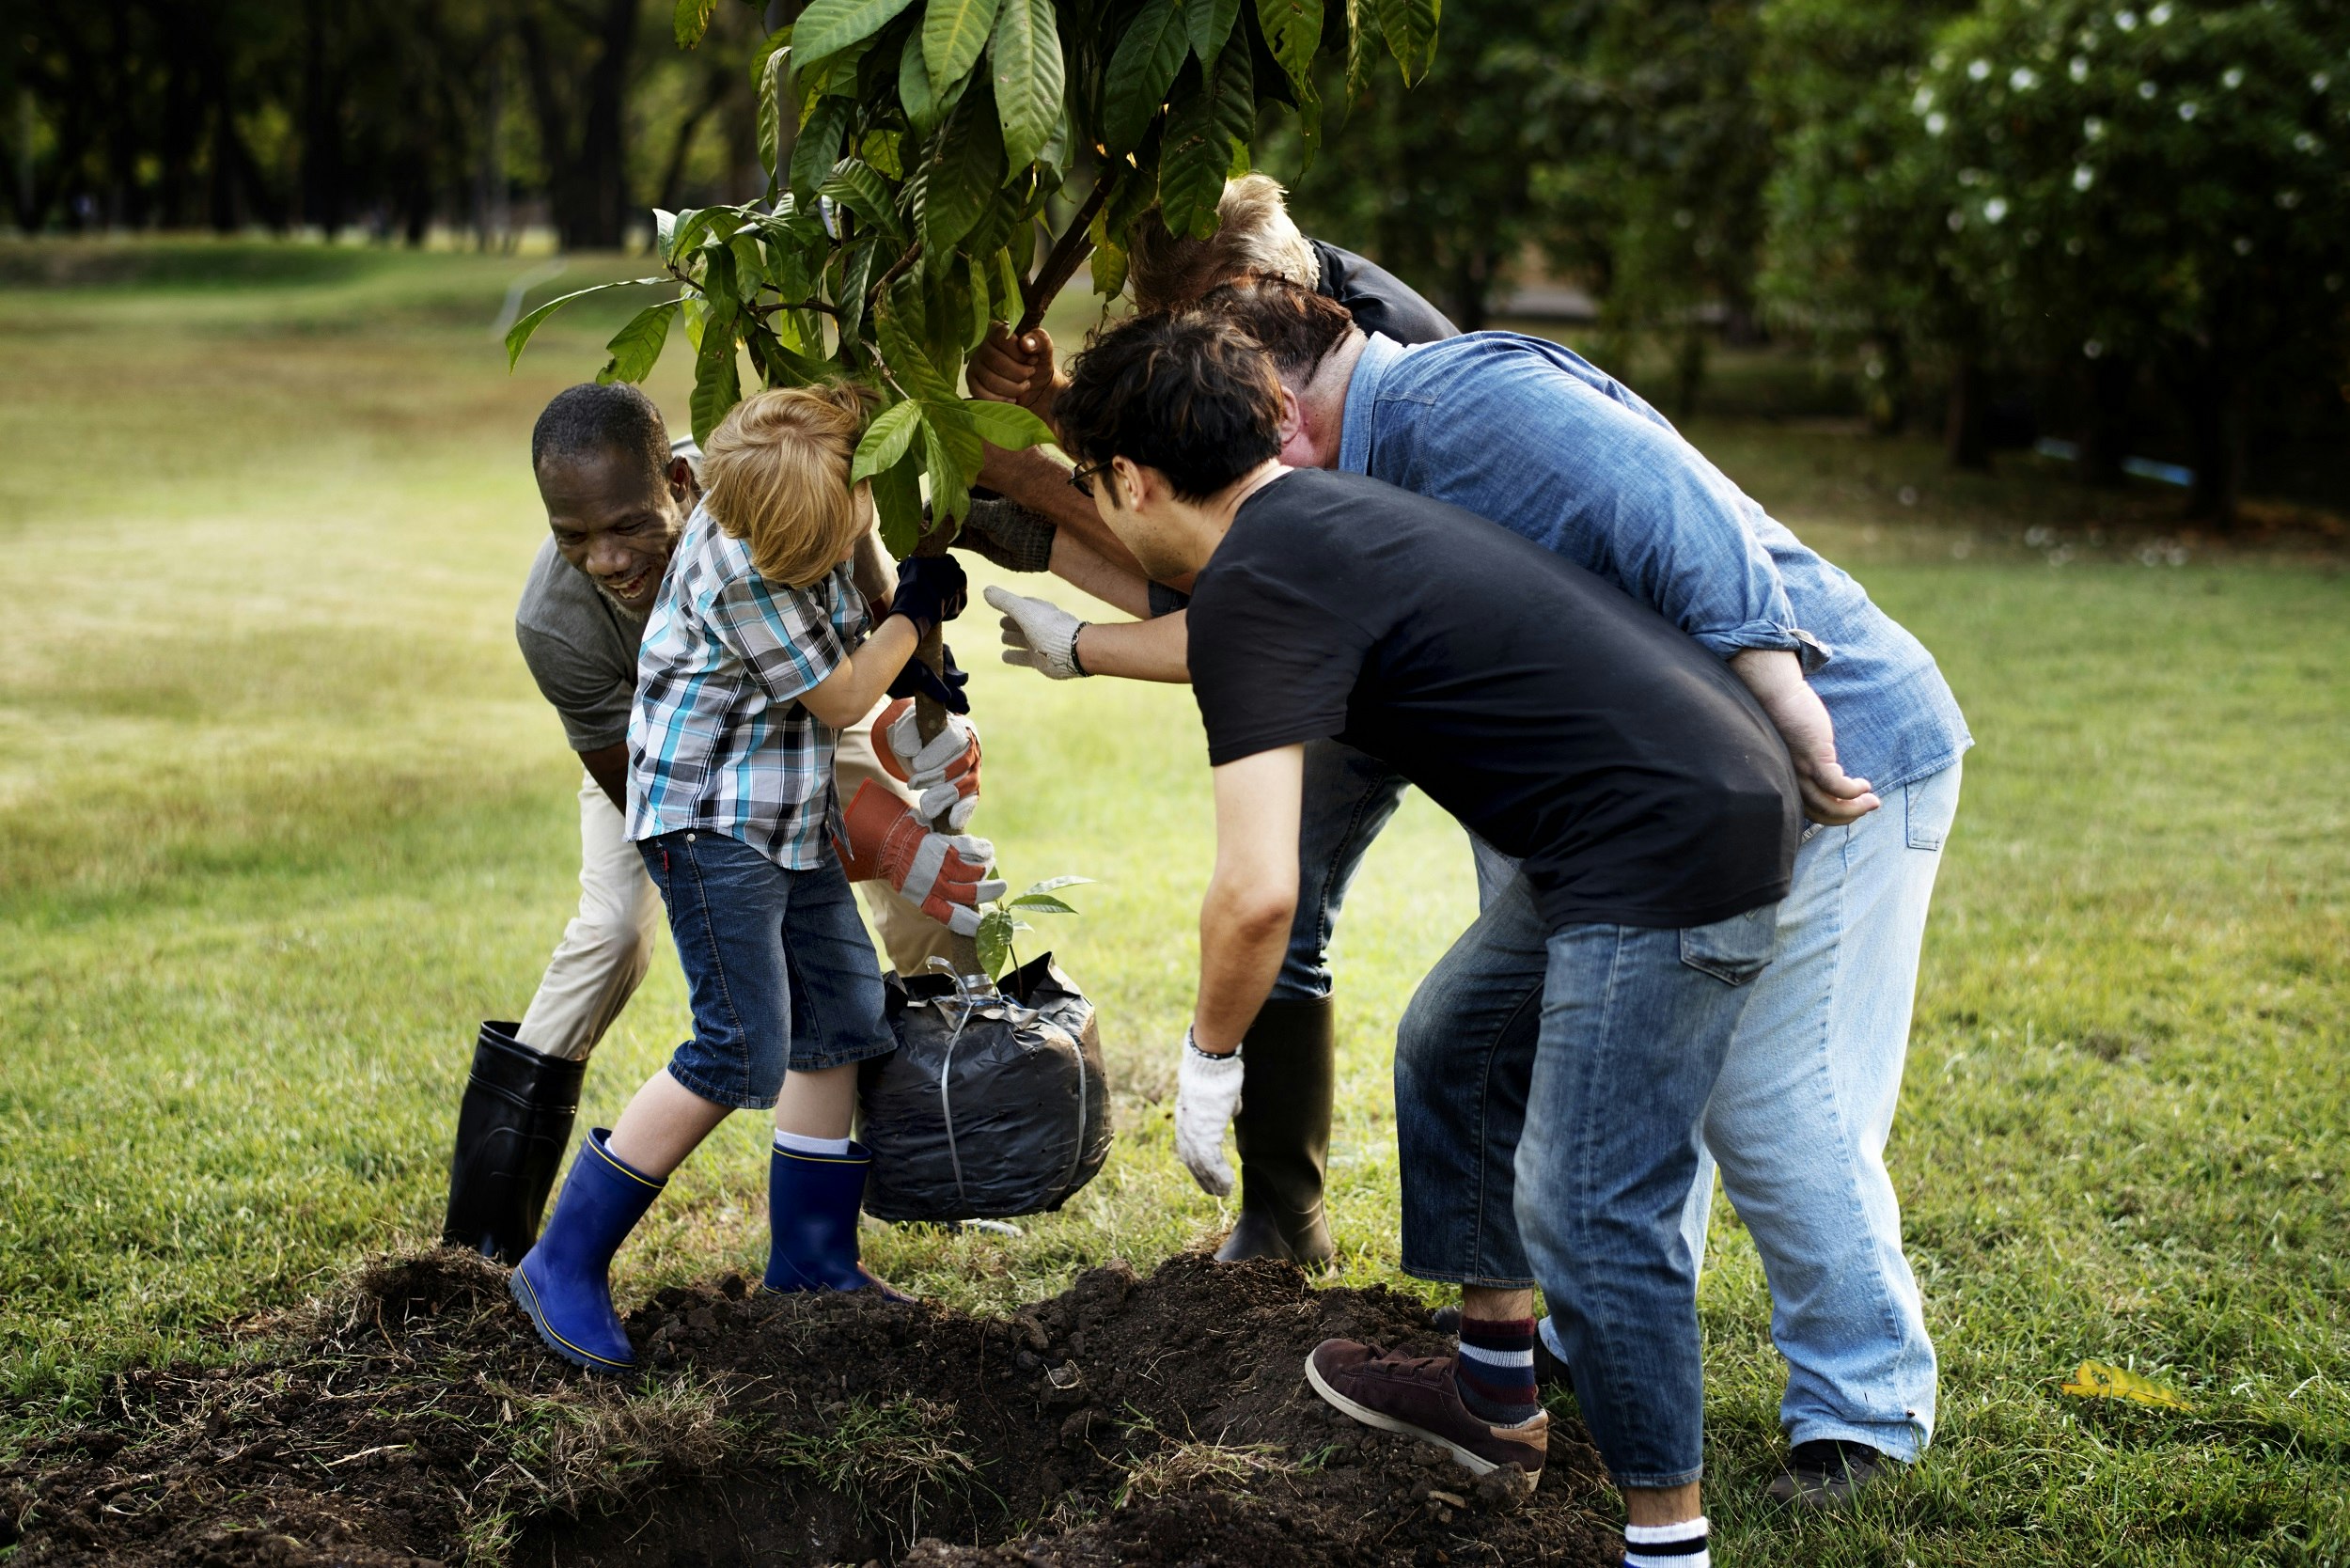 A group of four adults and a child lift a small tree towards a hole